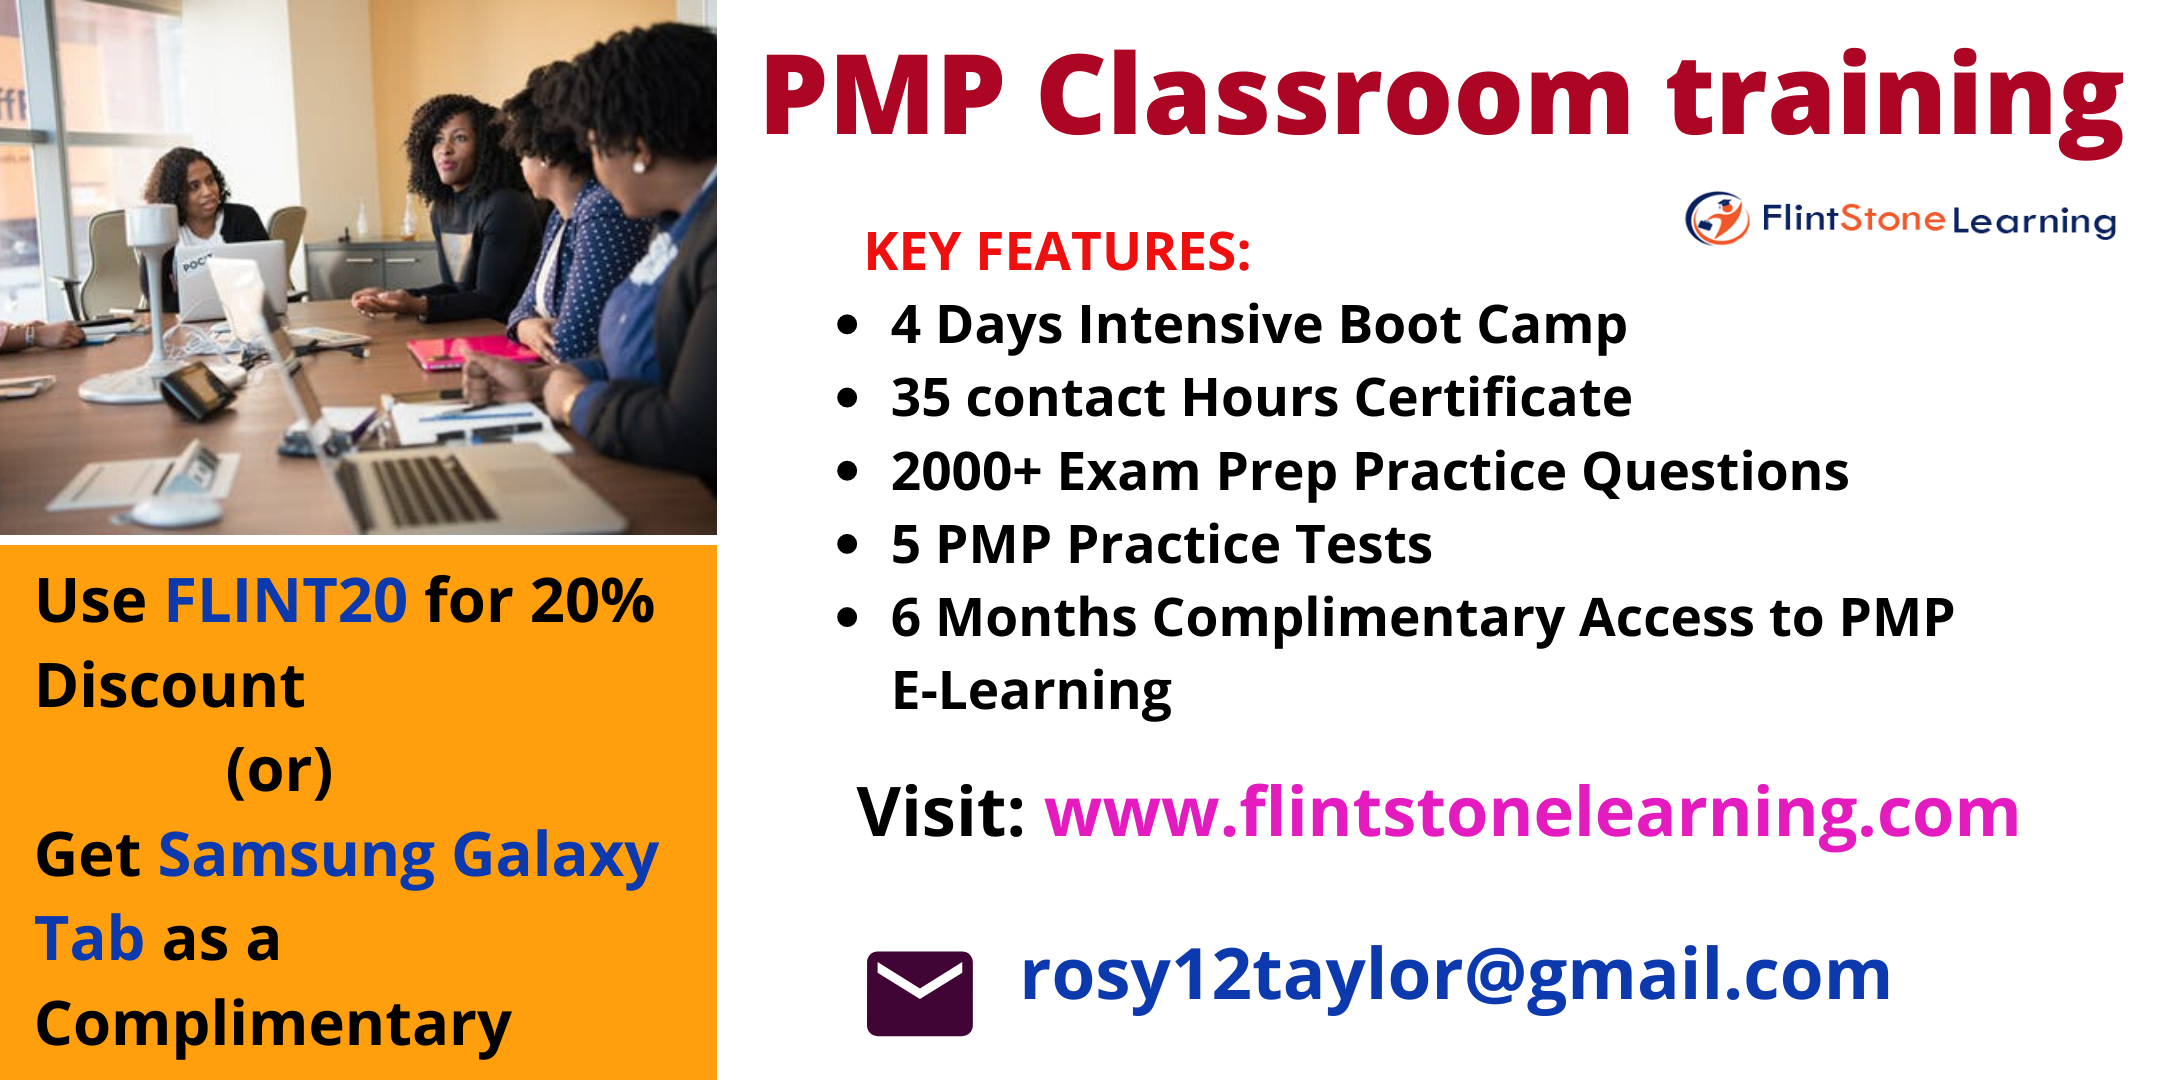 PMP Certification Training in Emeryville, CA